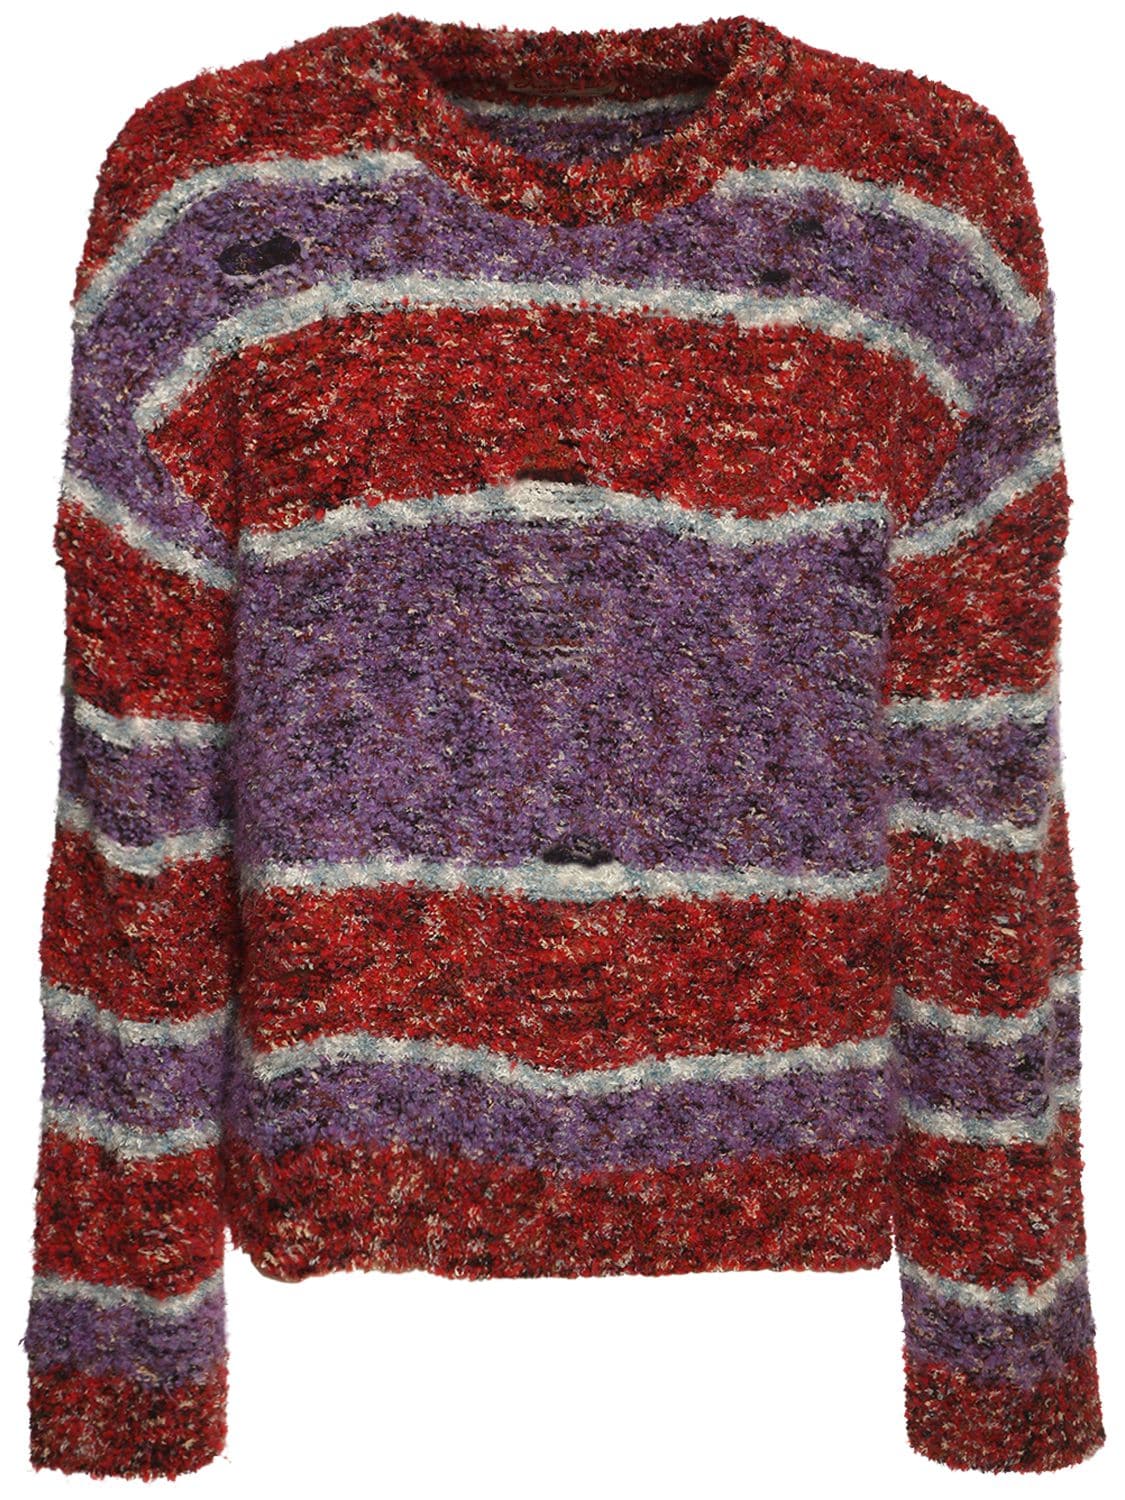 ANDERSSON BELL STRIPED KNIT CREWNECK SWEATER